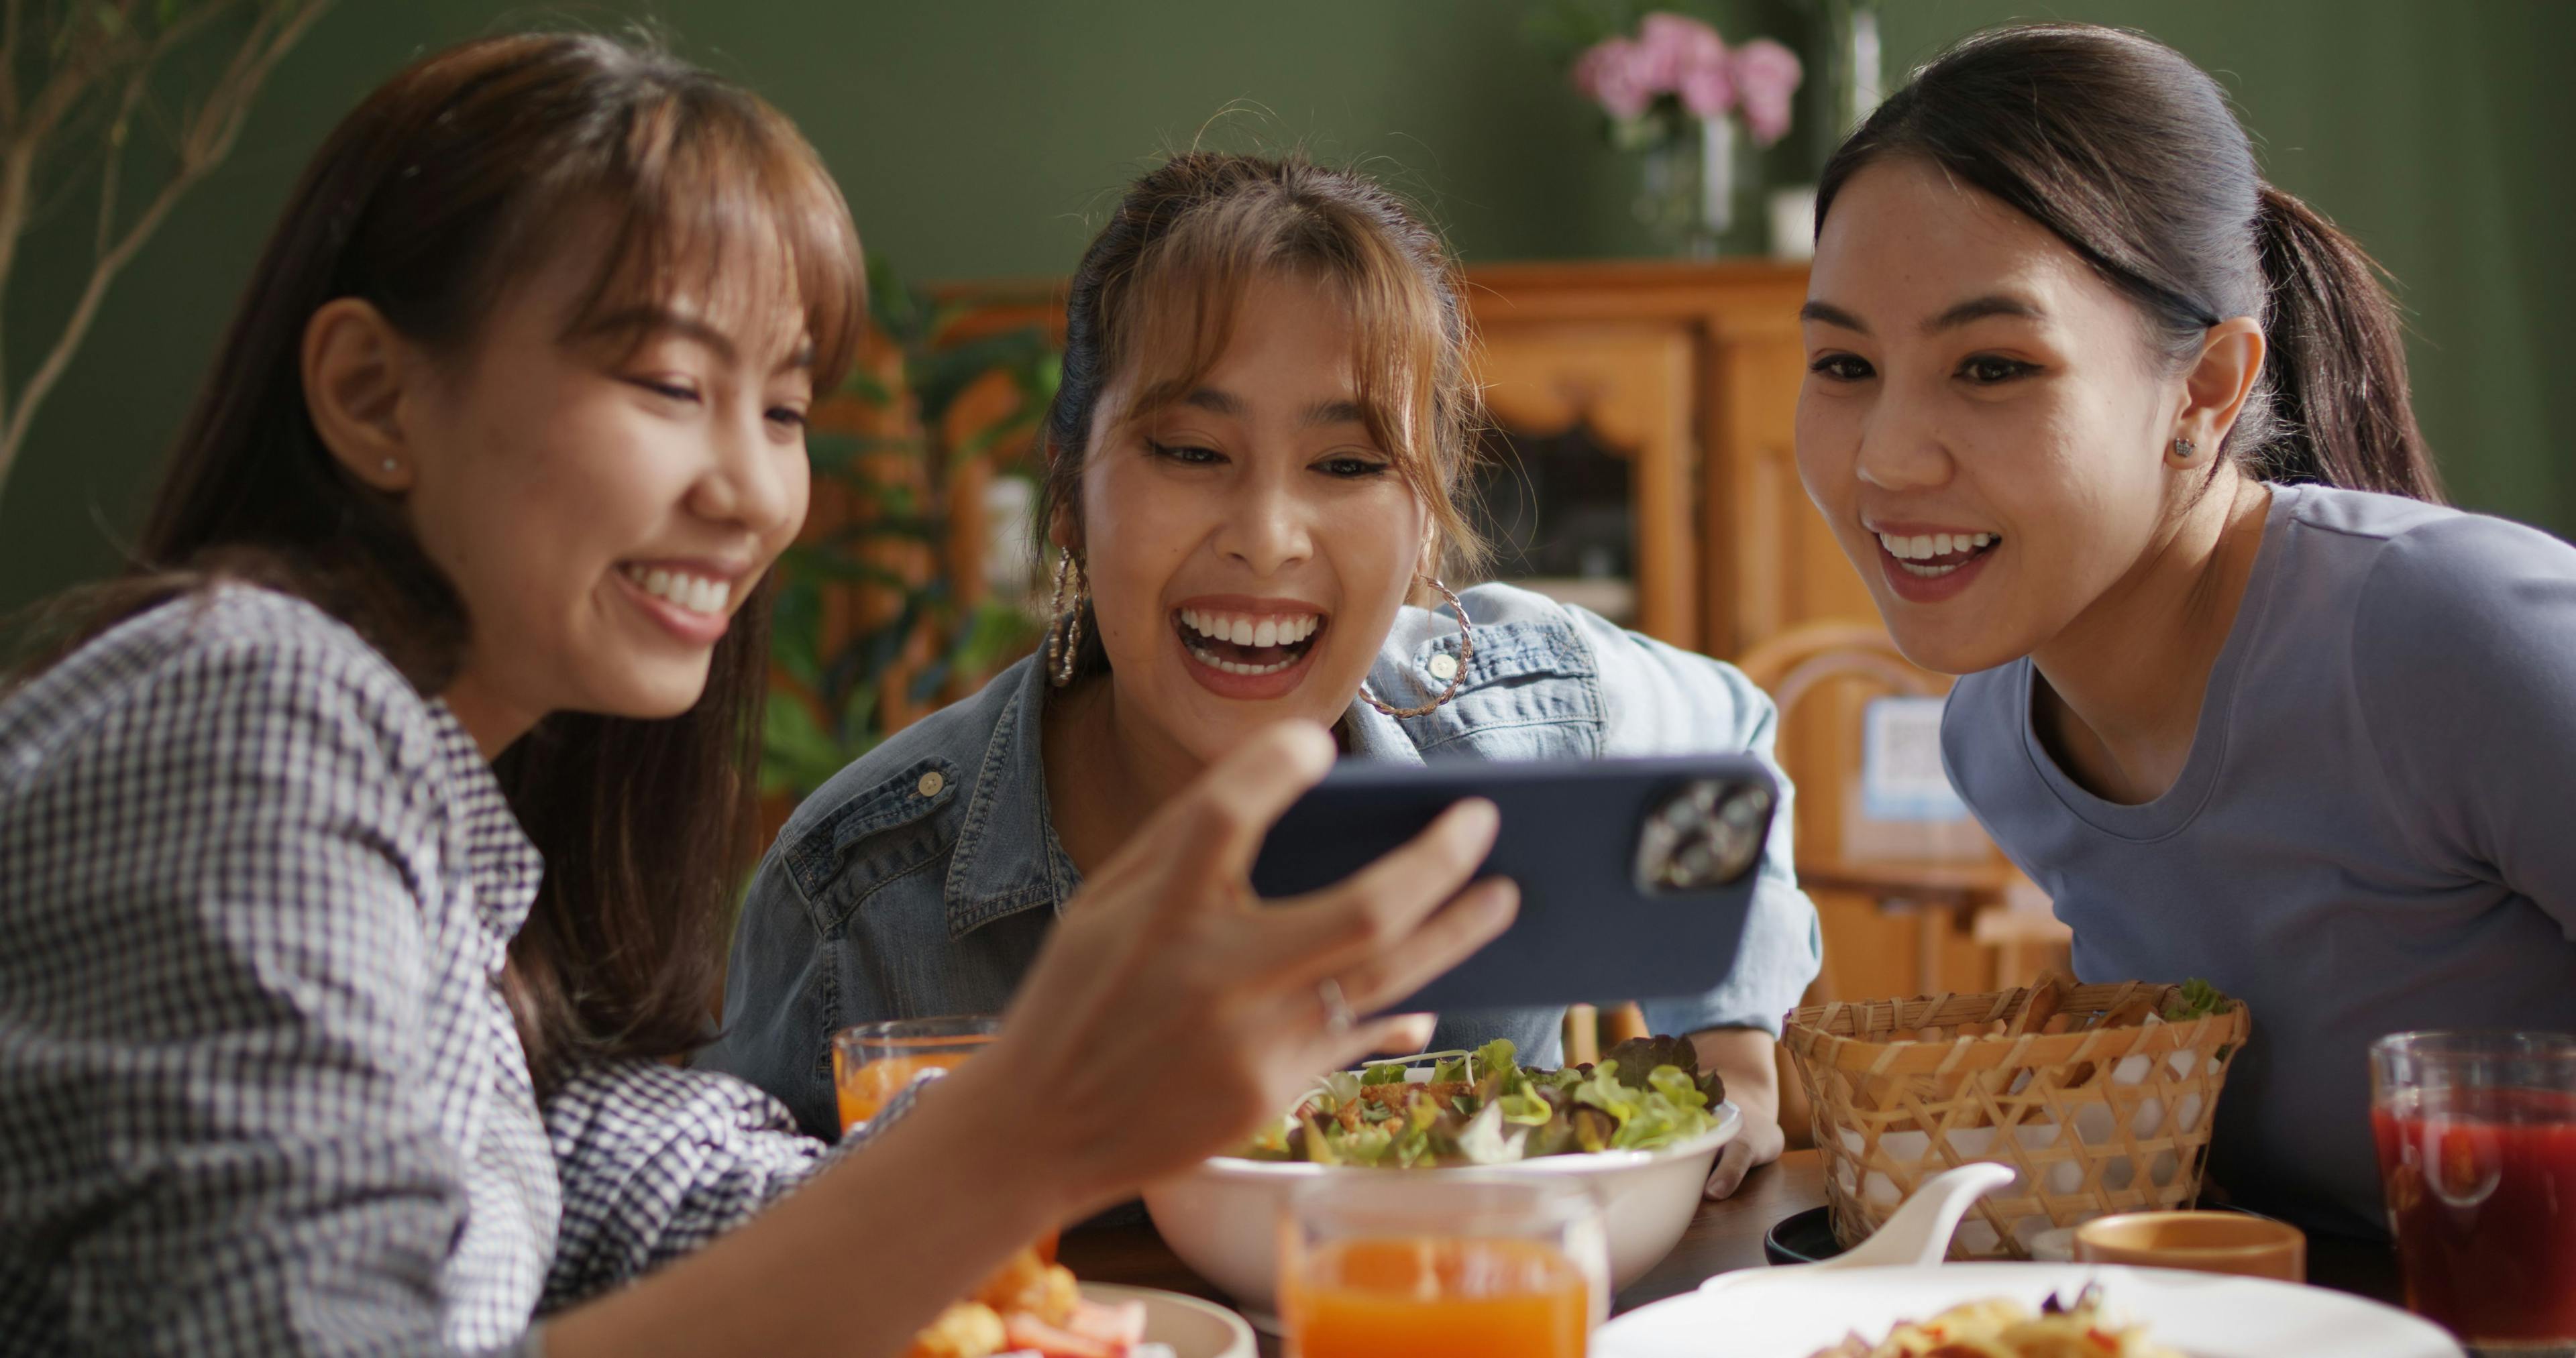 A delightful scene of three women smiling and using their cell phones to take a selfie, illustrating the essence of a TikTok guide for restaurants.